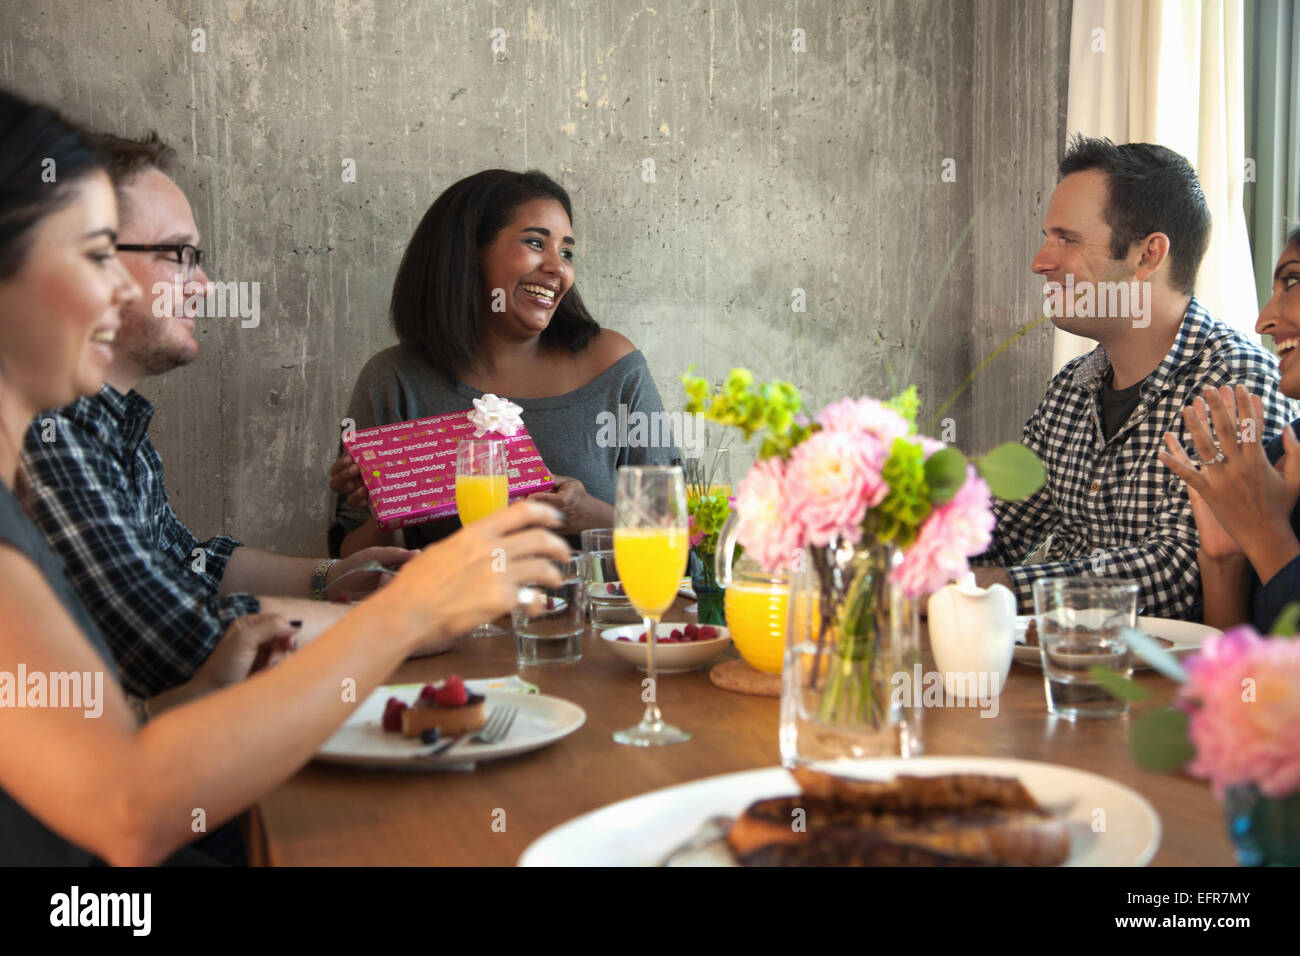 Group of friends at dinner table, Young woman holding wrapped gift Stock Photo